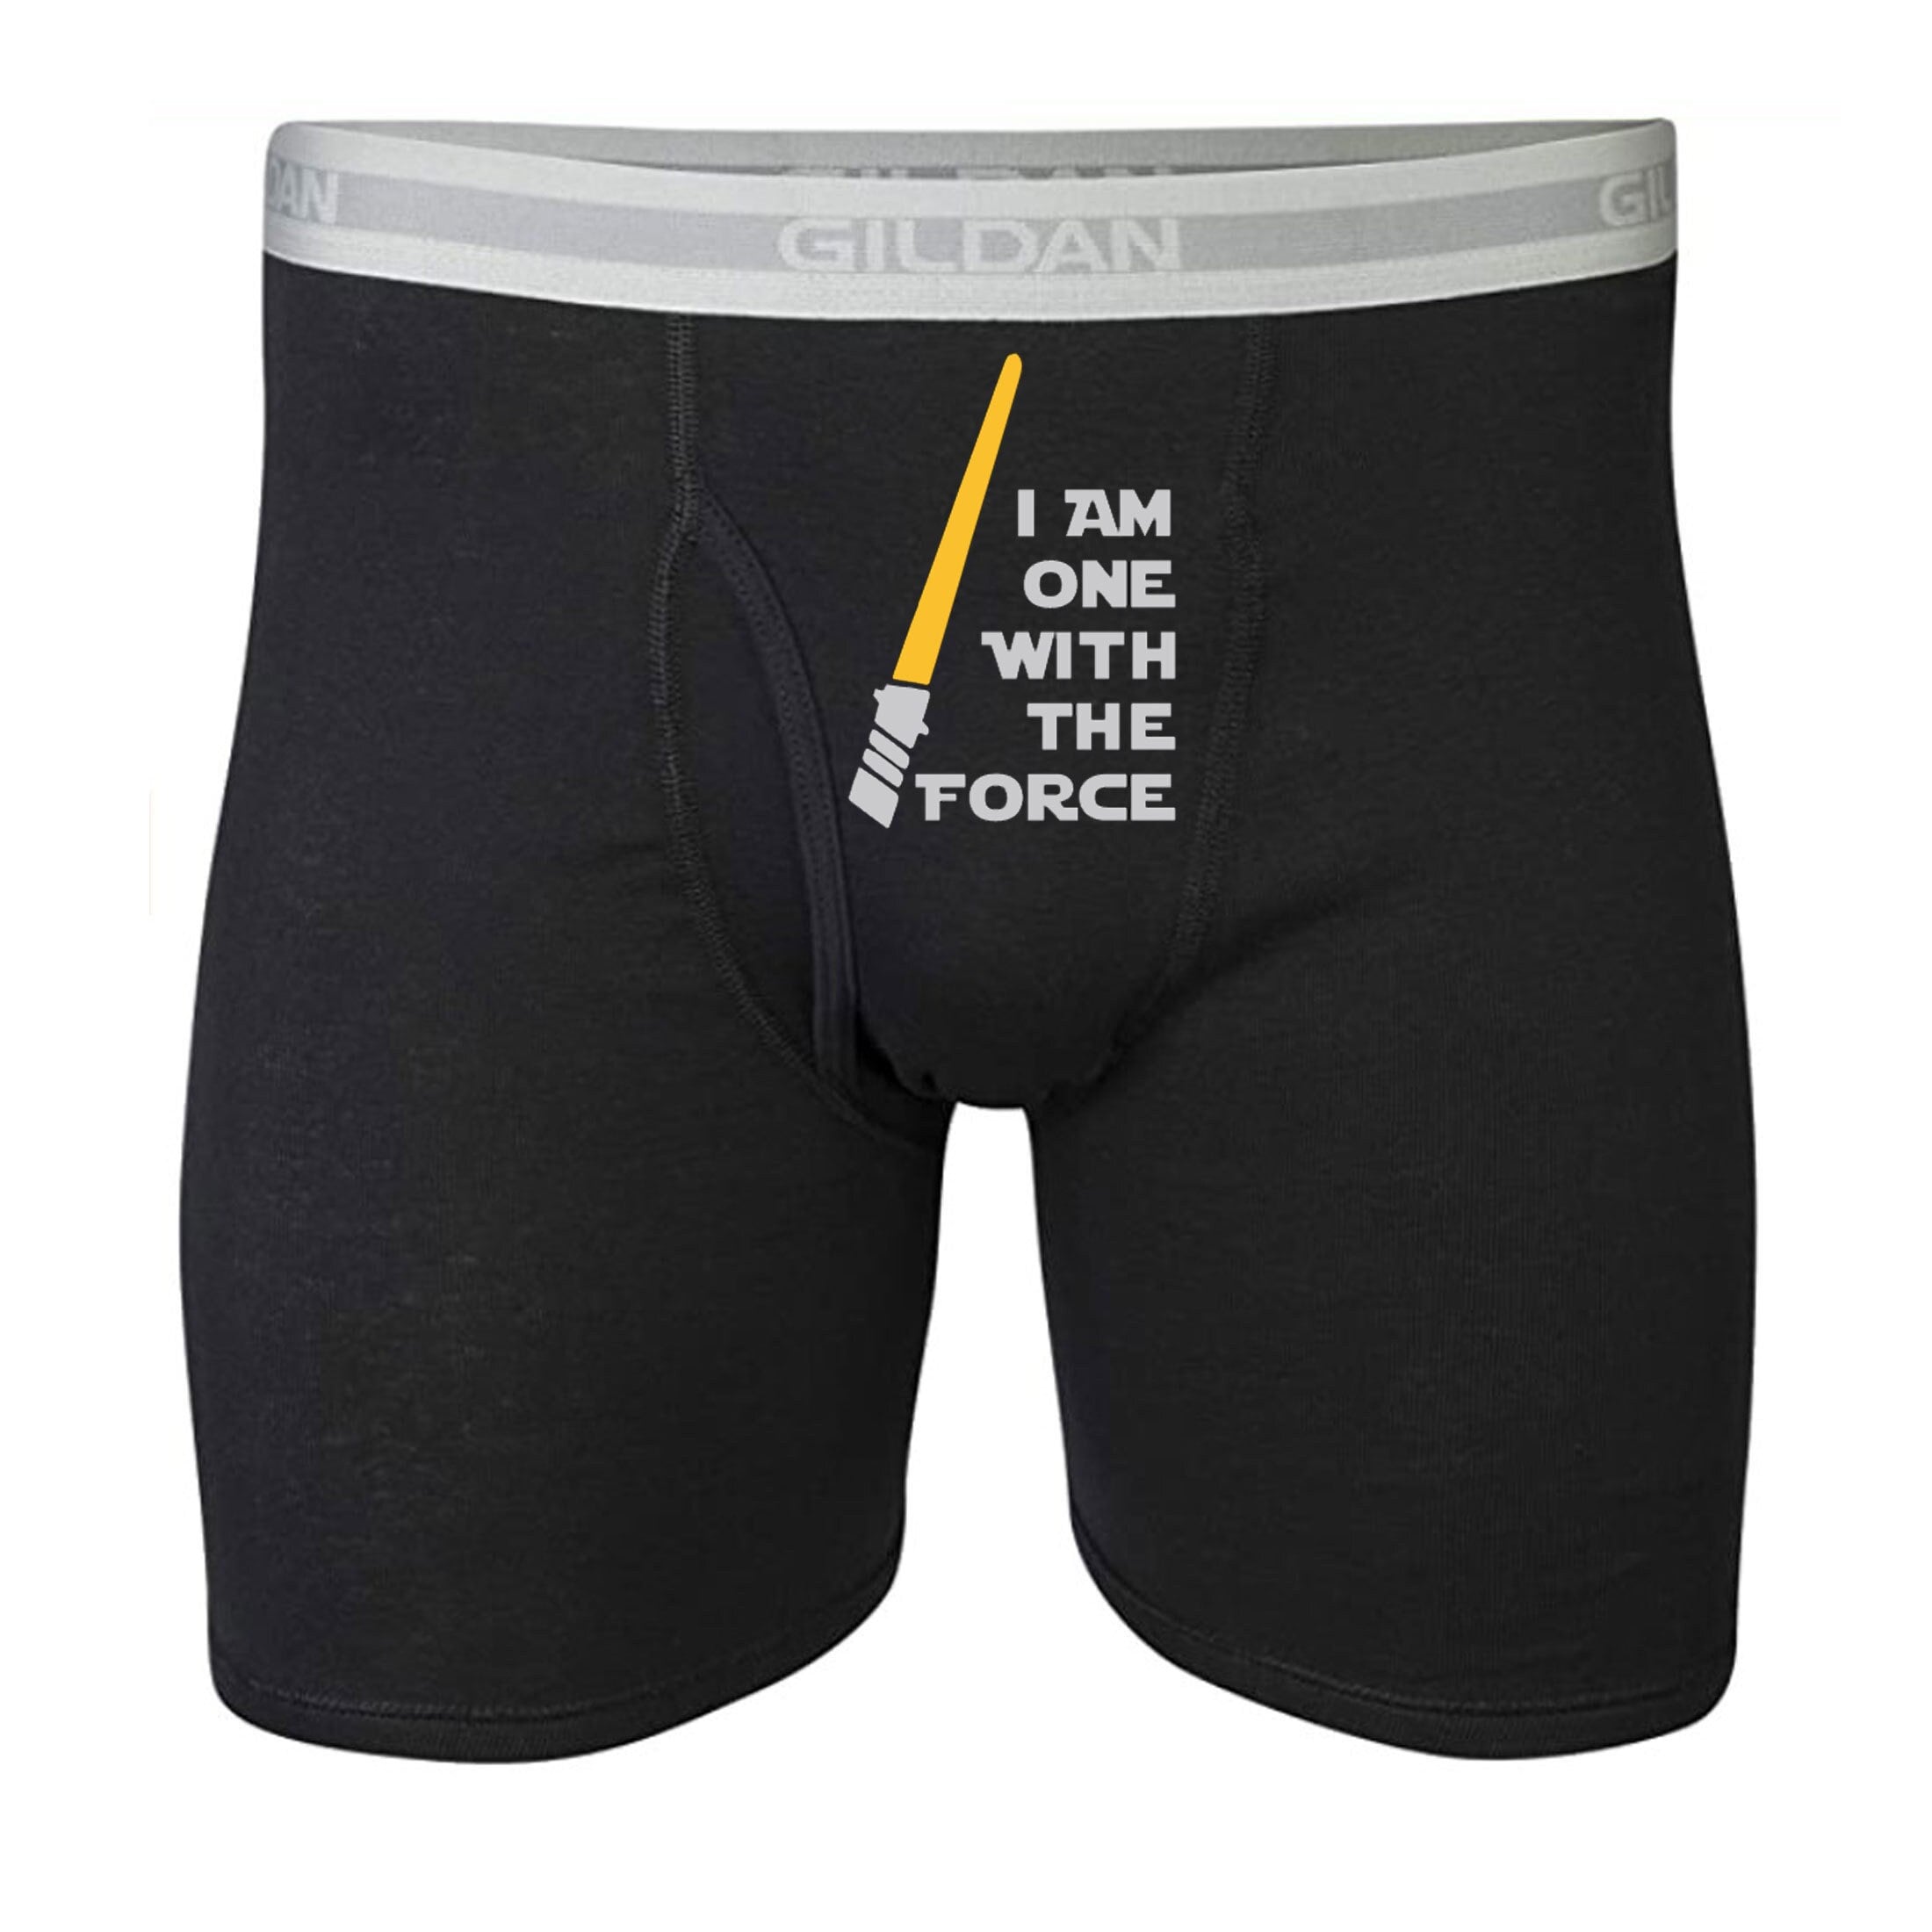 Funny Knickers With Your Face Printed on Them Cotton Knickers